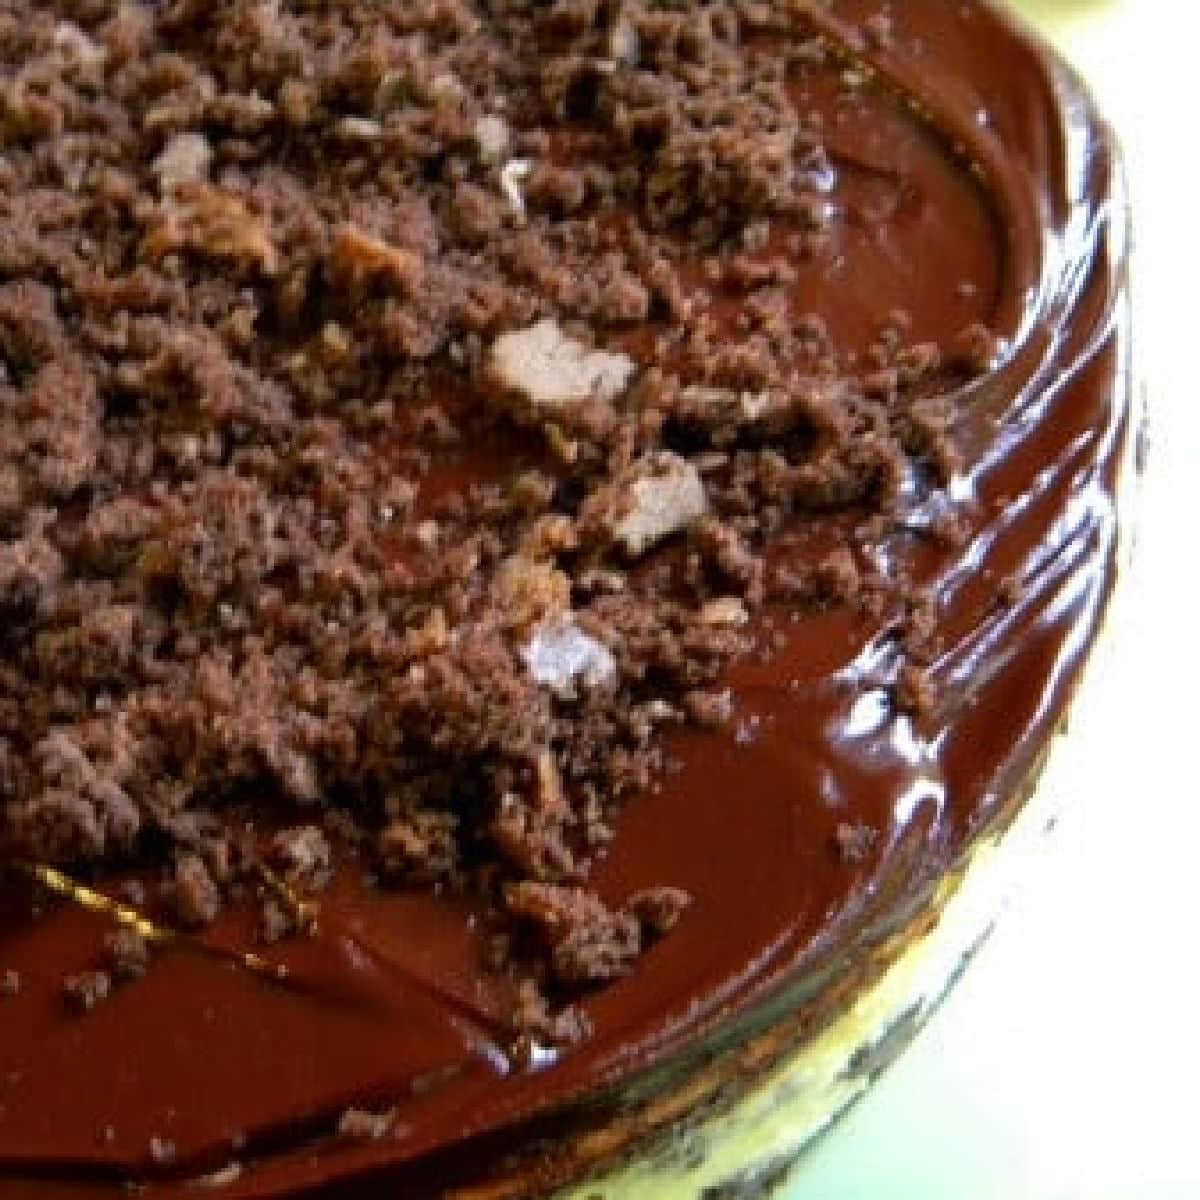 Closeup of the top of the brownie cheesecake with the brownie crumbs over the ganache.